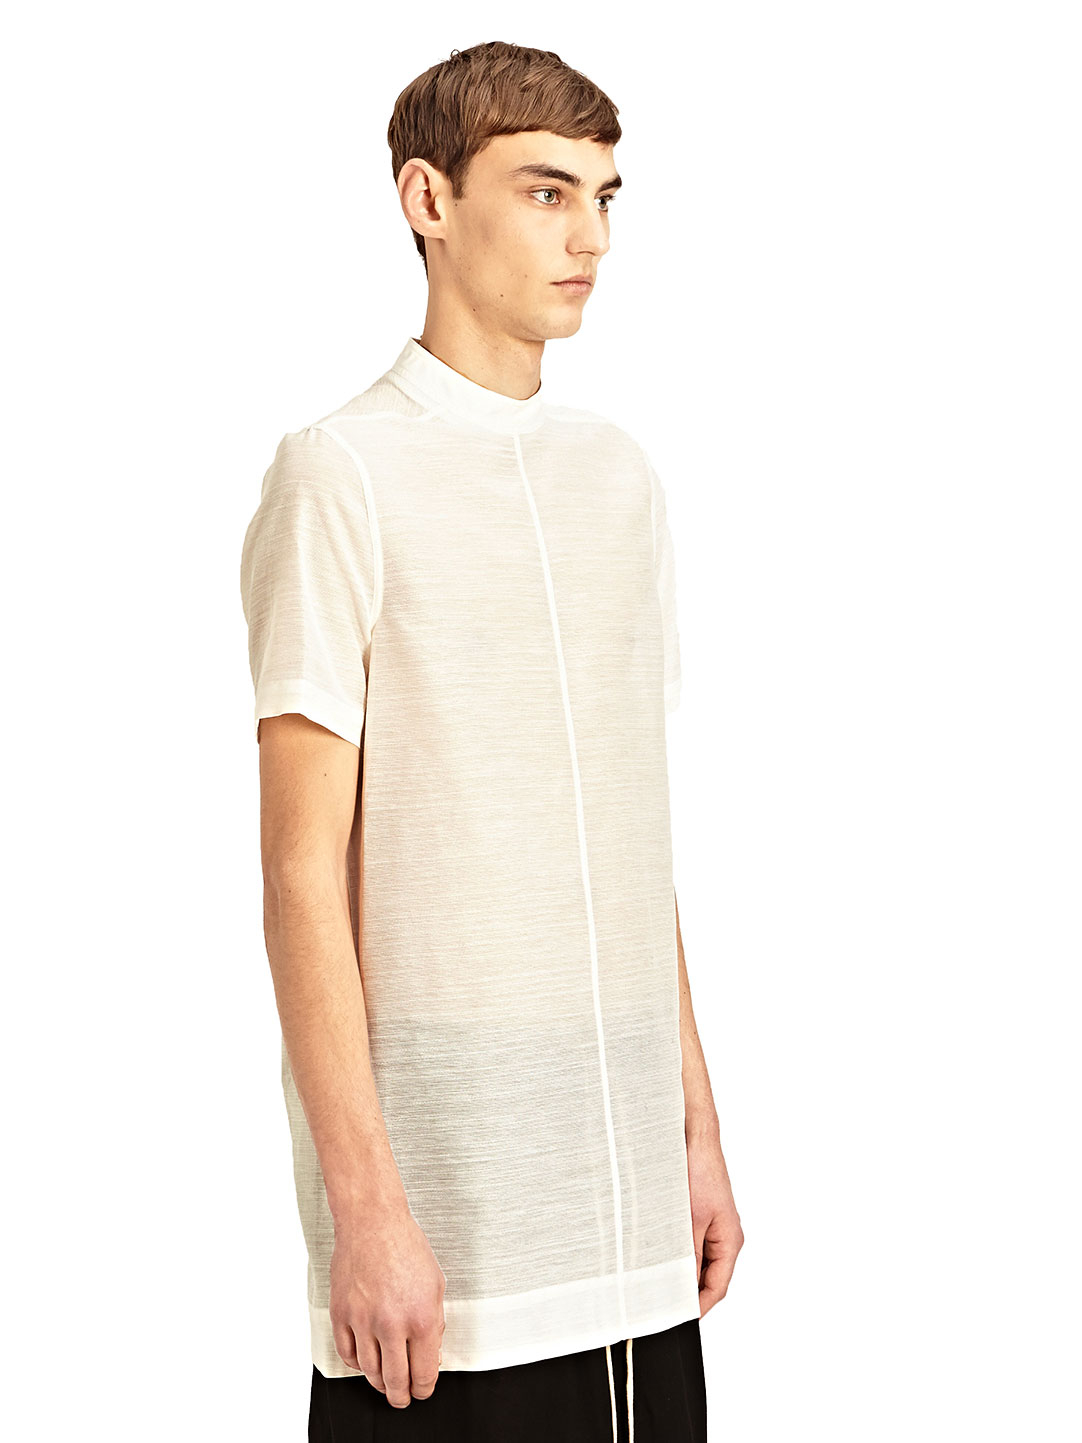 Lyst - Rick Owens Mens Woven Moody Tunic in White for Men